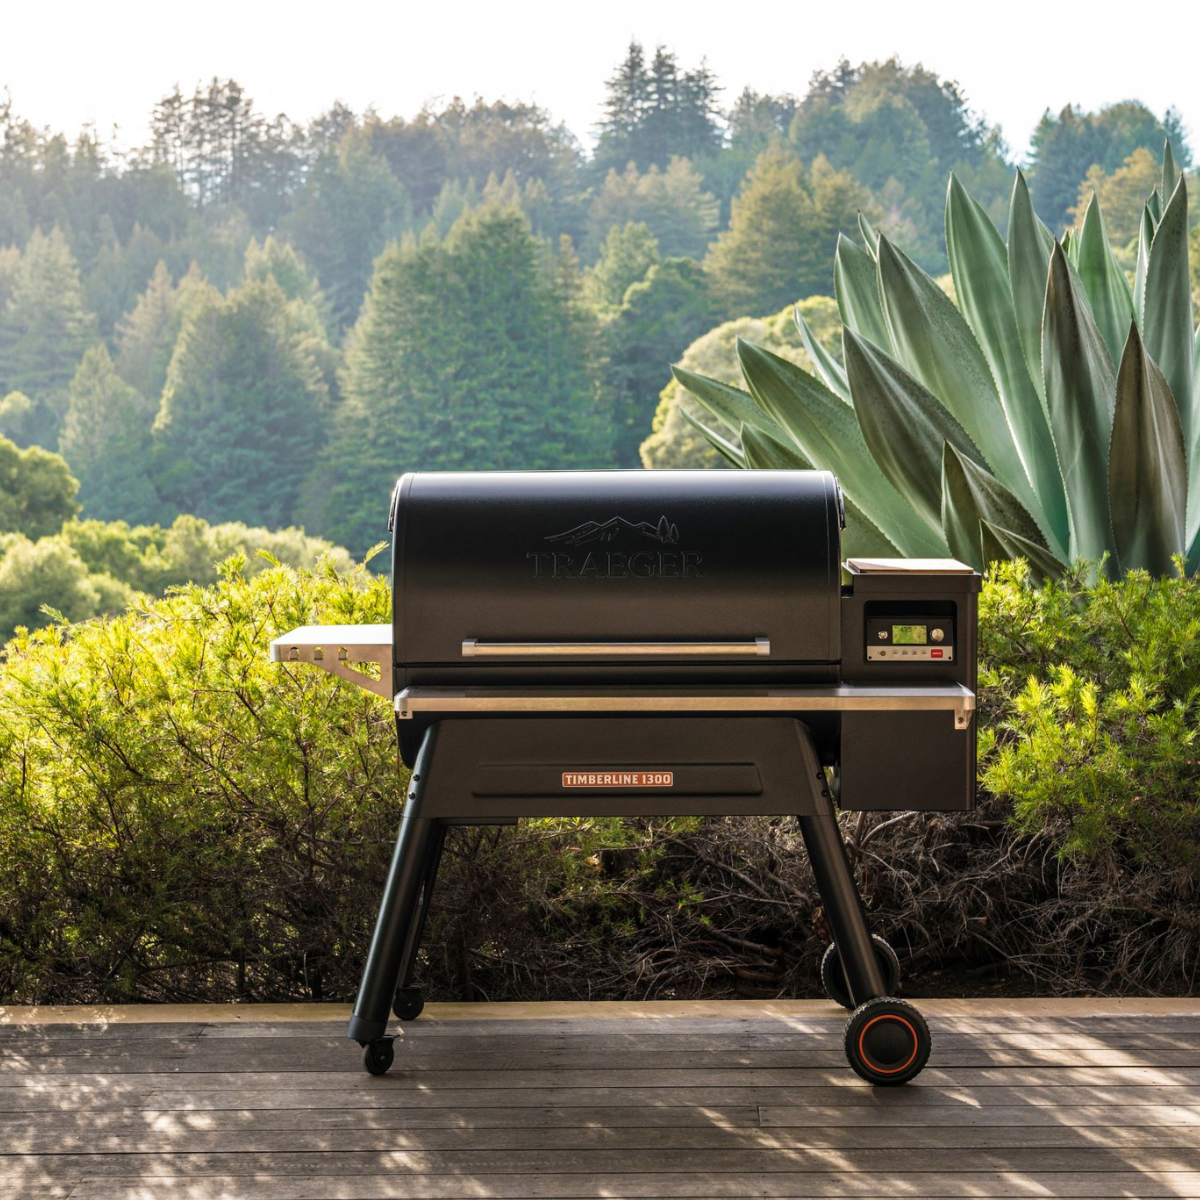 Freestanding BBQ grills - a wide choice of brands available at Kitchen in the Garden, Surrey